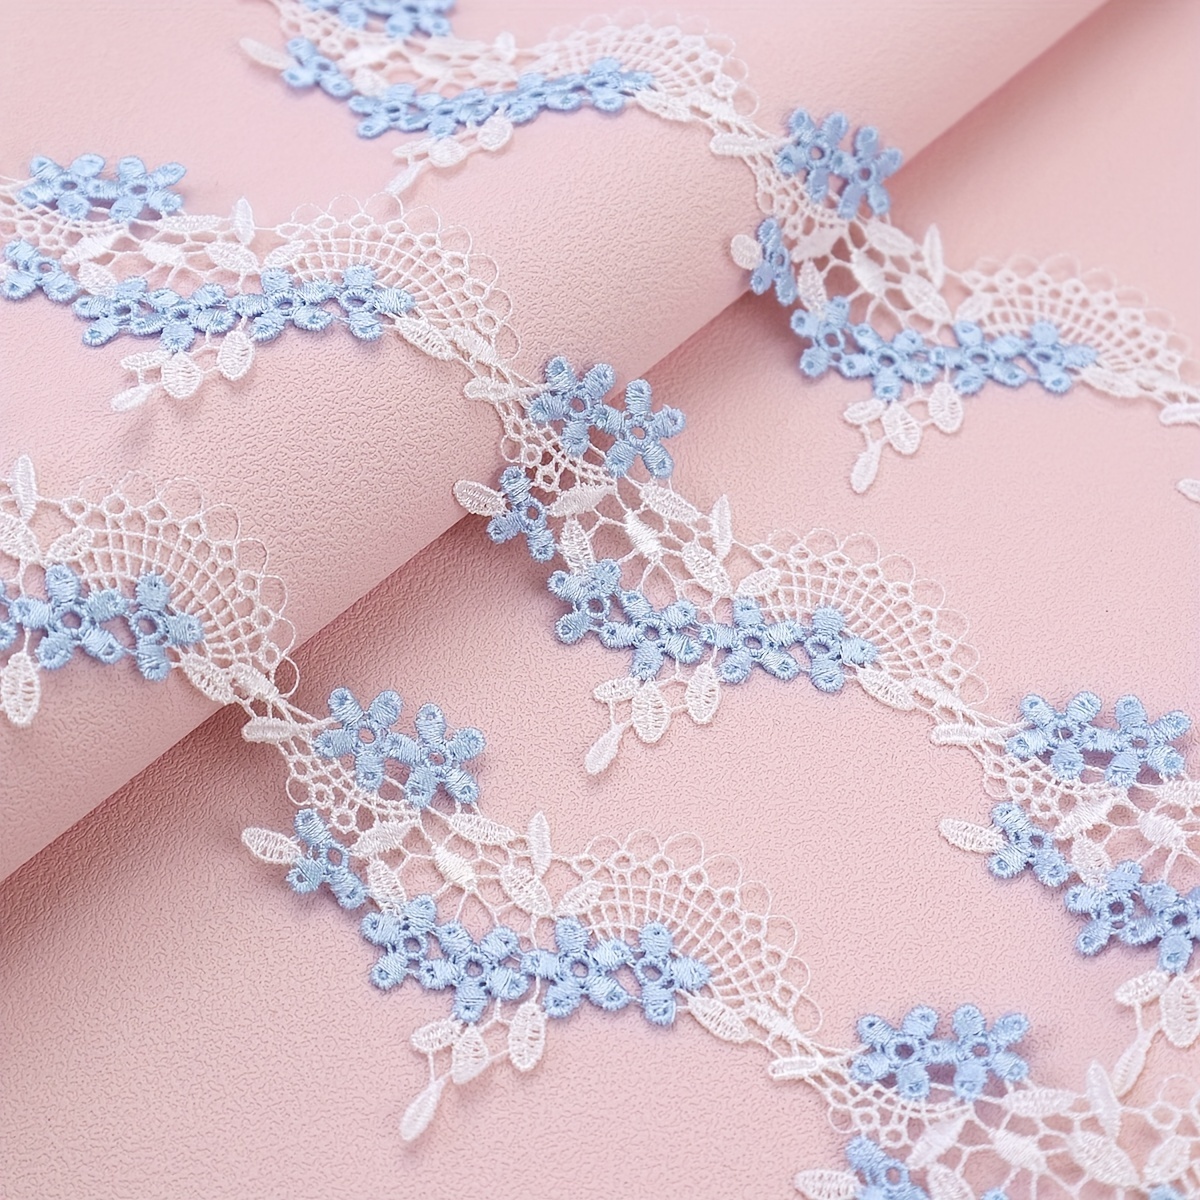 Lace Ribbon Sewing Lace Trim, White Flower Lace Ribbon Trim, Embroidery  Applique Fabric Crafts for Home Wedding Decoration 7 Yards